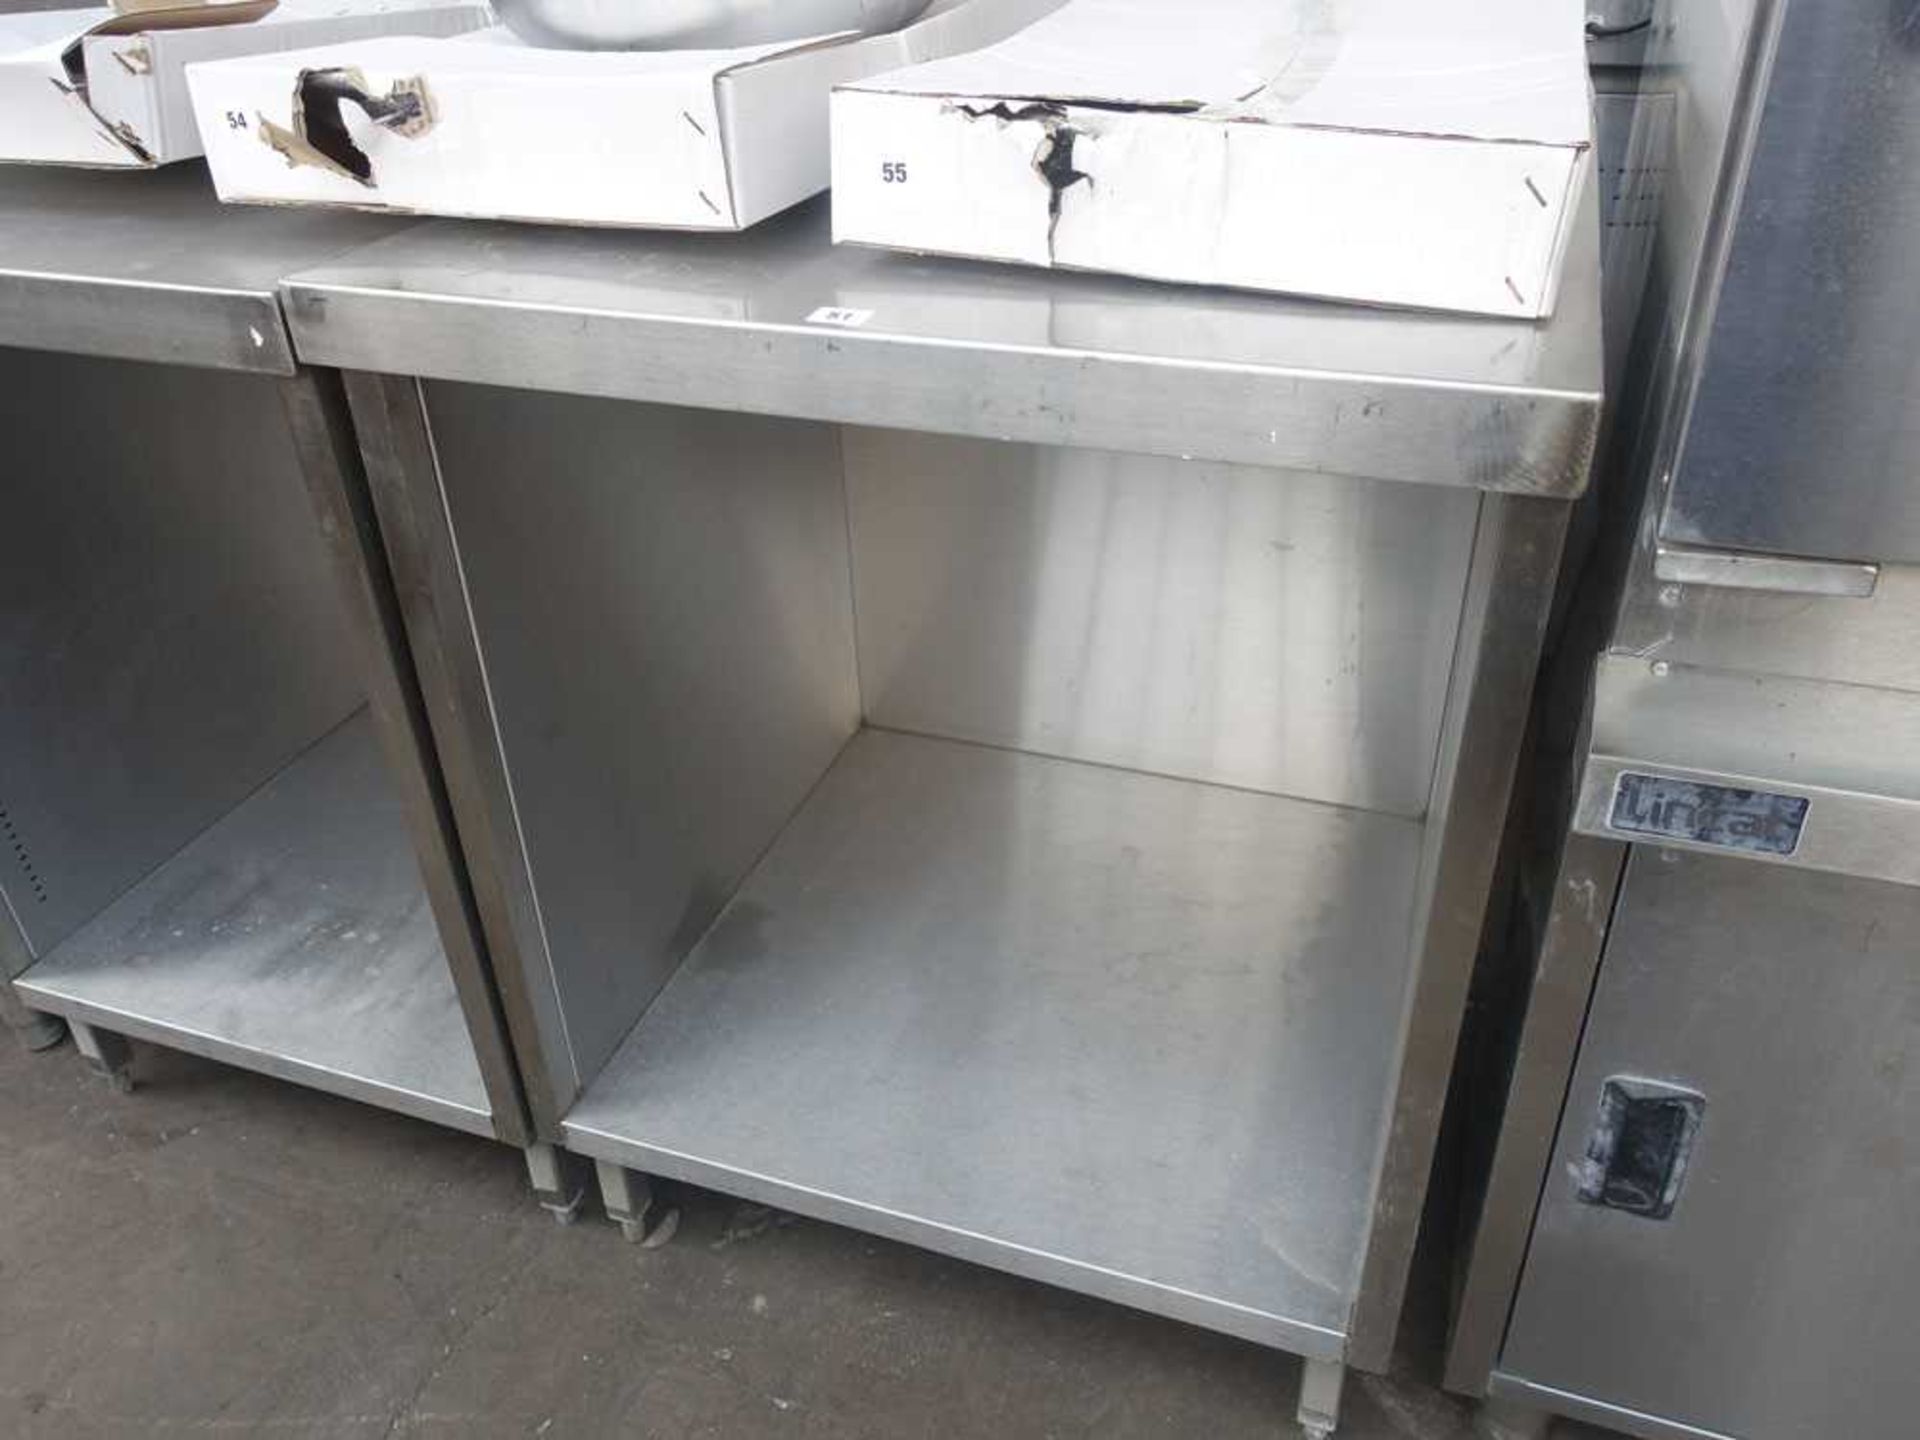 72cm stainless steel preparation surface